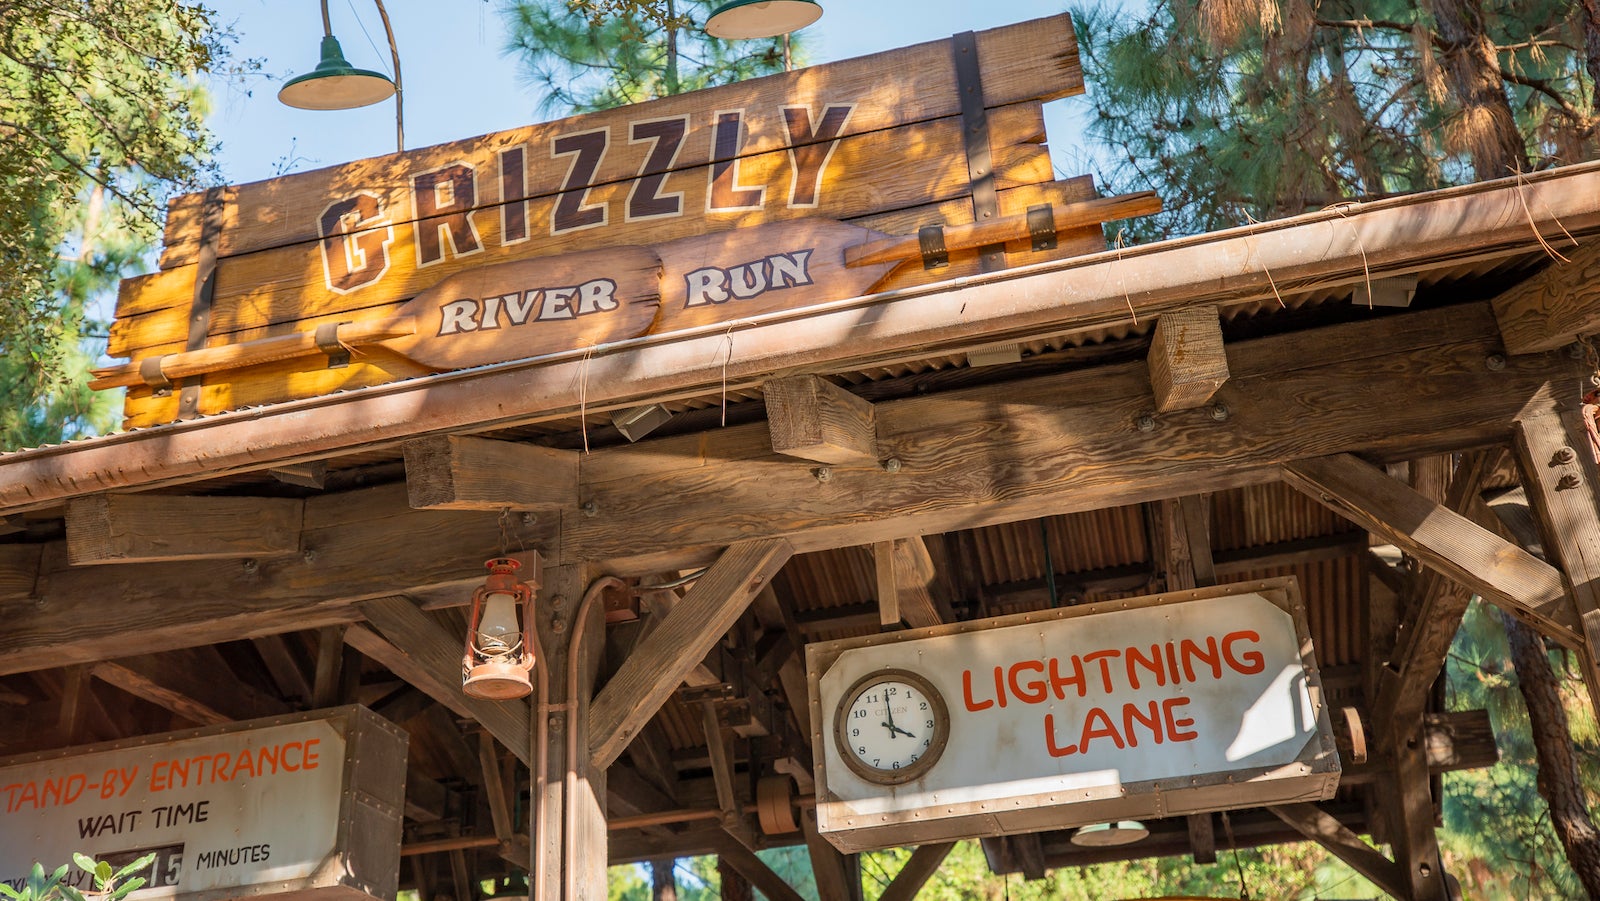 grizzly river run